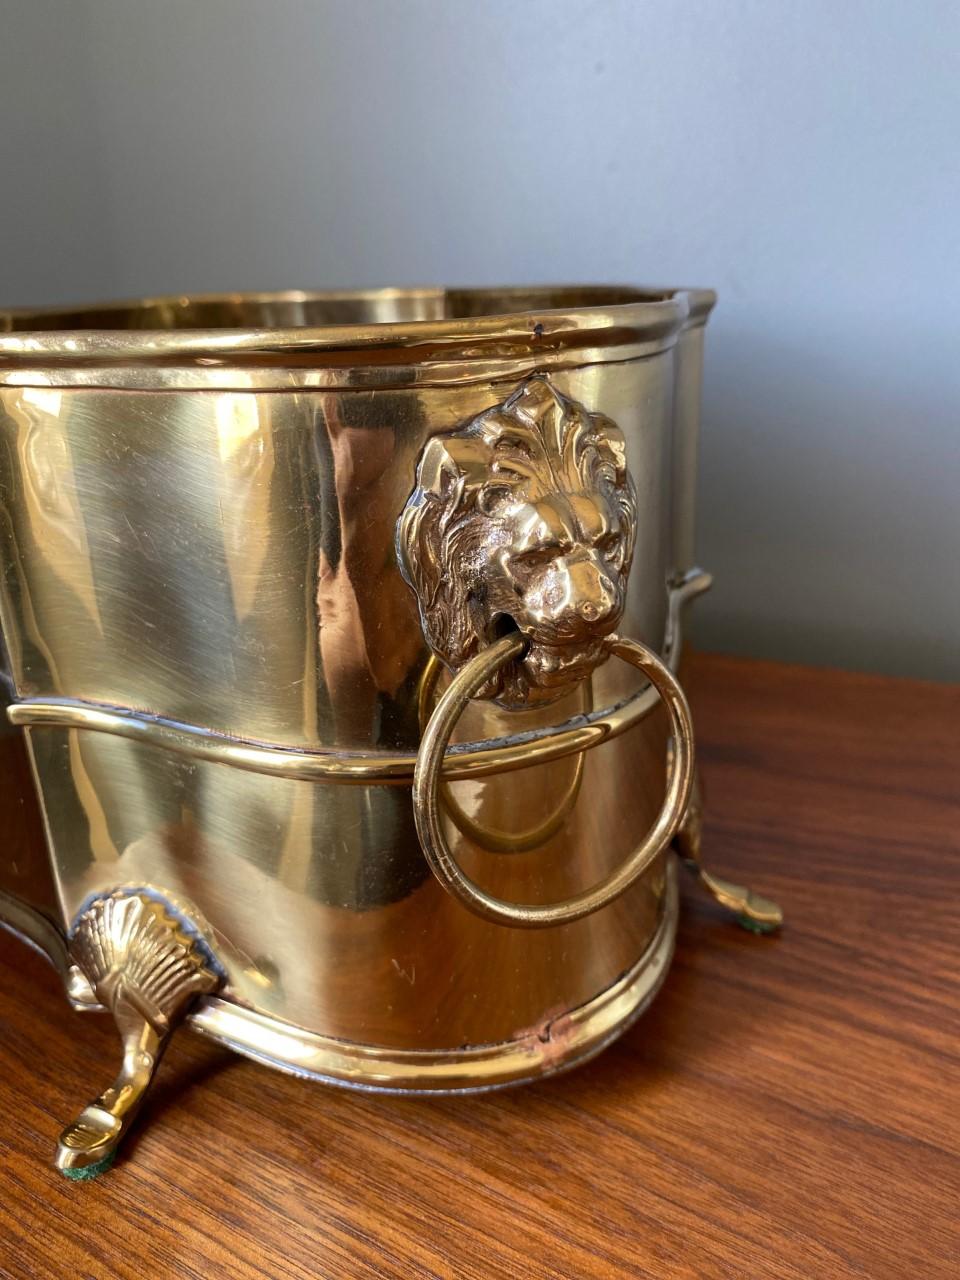 Antique Brass Jardiniere Planter with Lion Head and Feet Details For Sale 1